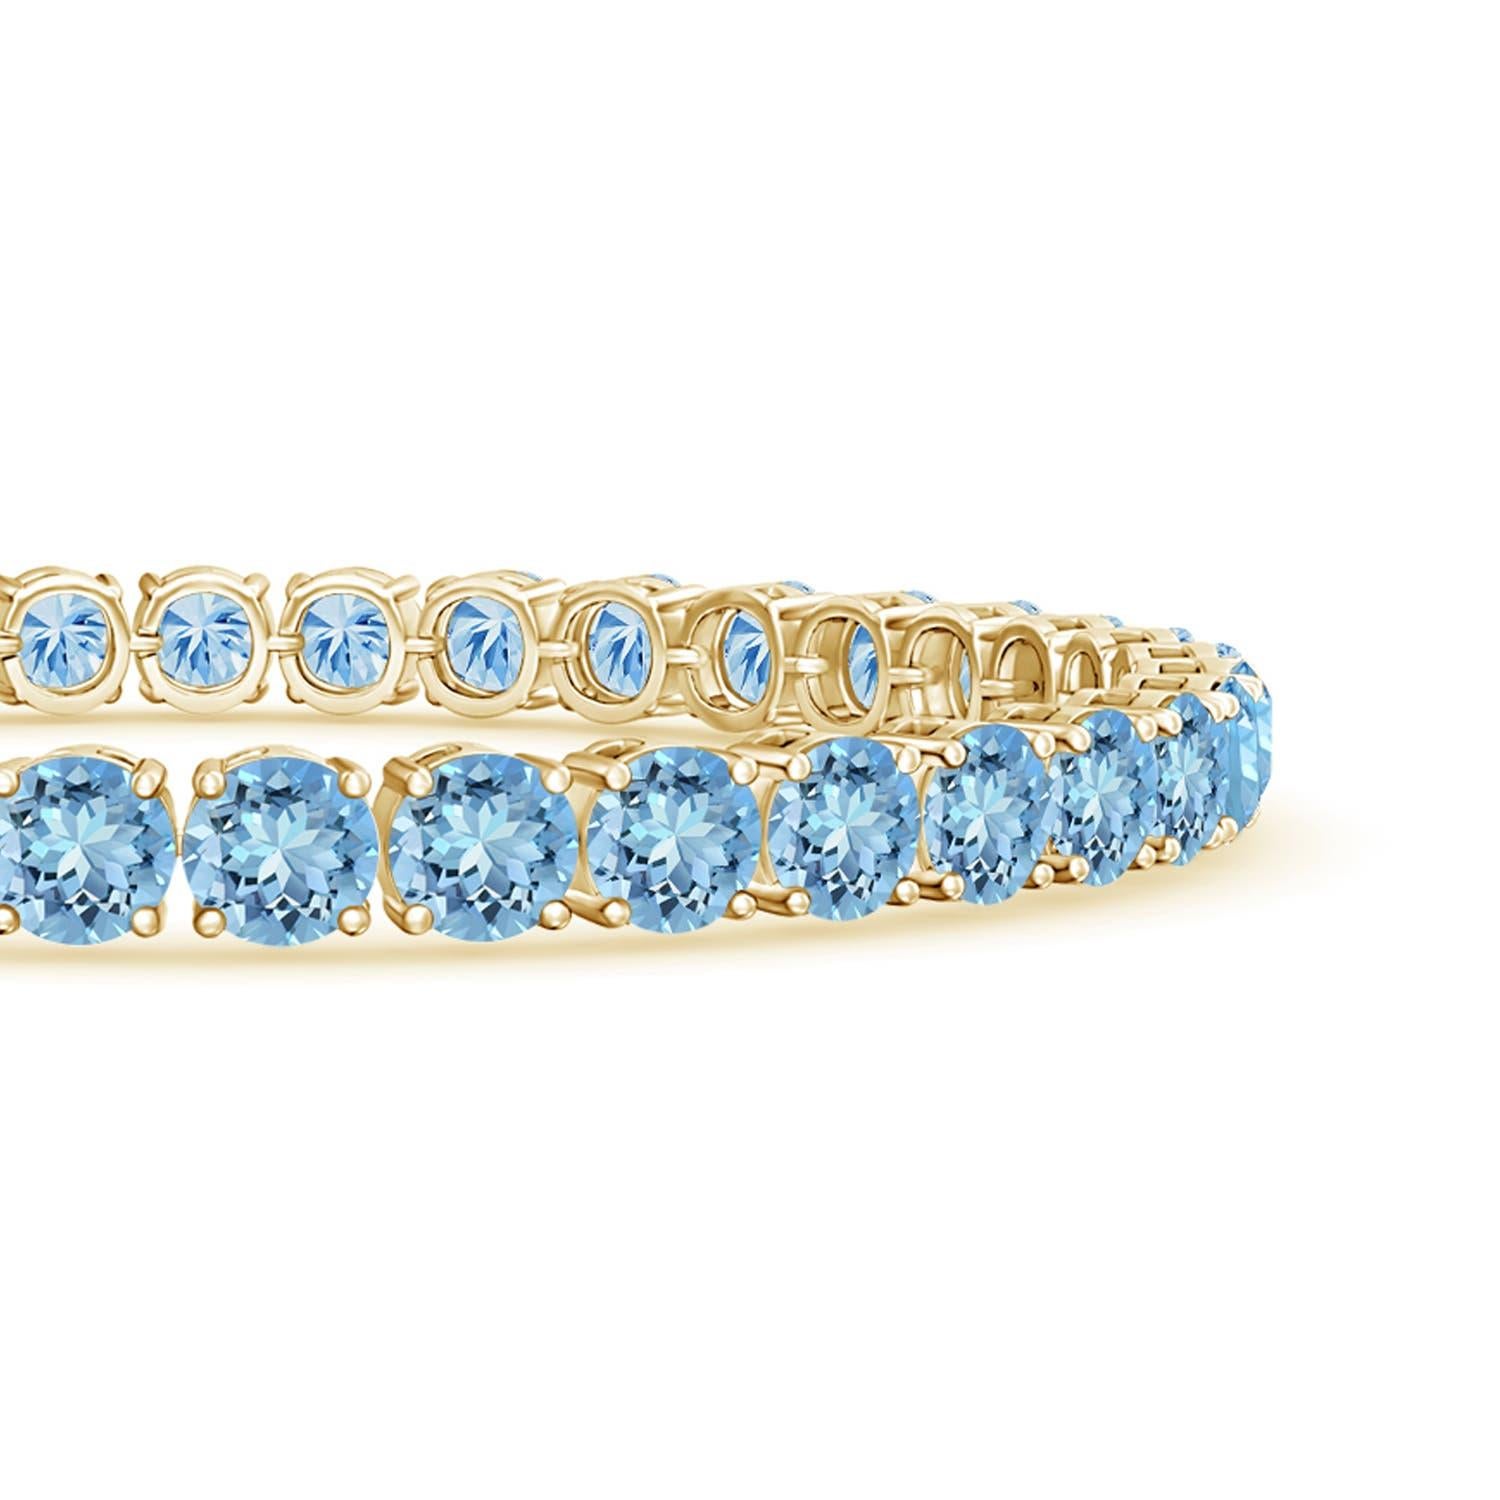 Simple yet so appealing, this tennis bracelet in 14k rose gold is effortlessly elegant. The alternated round diamonds and icy blue aquamarines are secured in bezel settings.